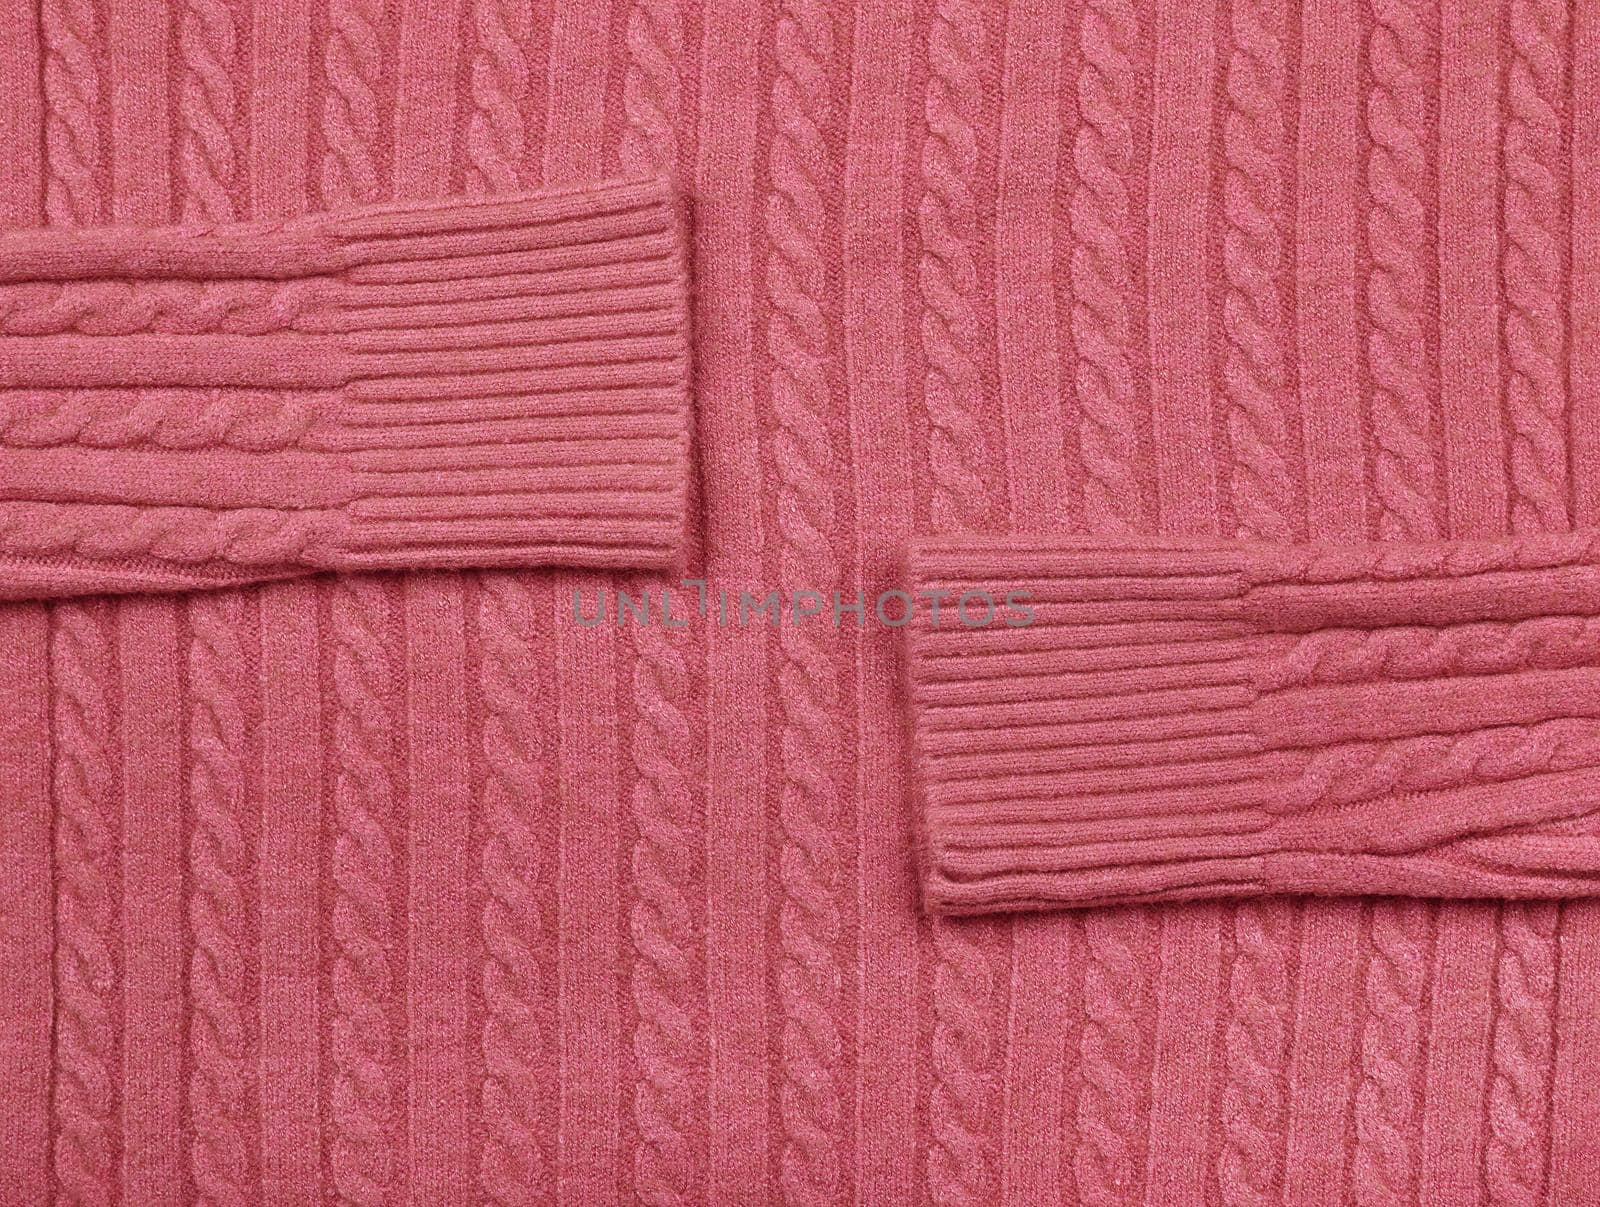 Background texture of pink knitted wool fabric by BreakingTheWalls